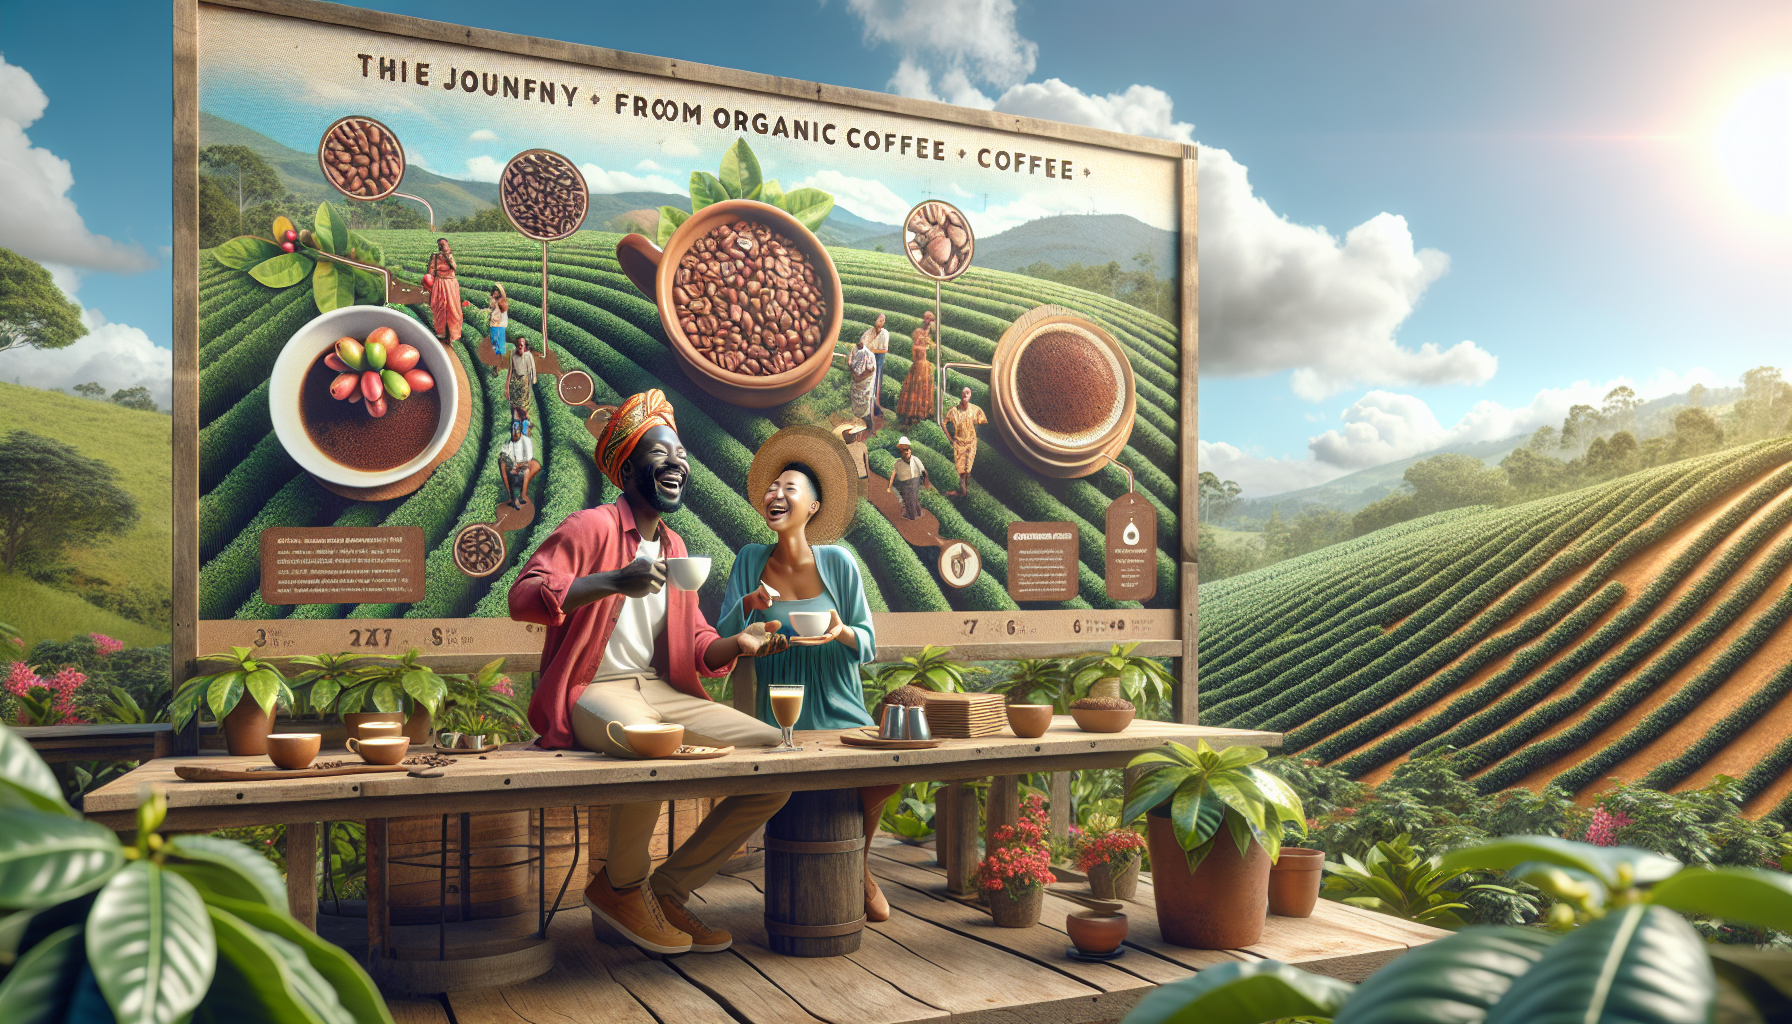 Visualize an engaging scene signifying the benefits of organic coffee. An African woman and an Asian man are joyfully sipping coffee at a cosy café made of reclaimed wood. They are surrounded by a lus